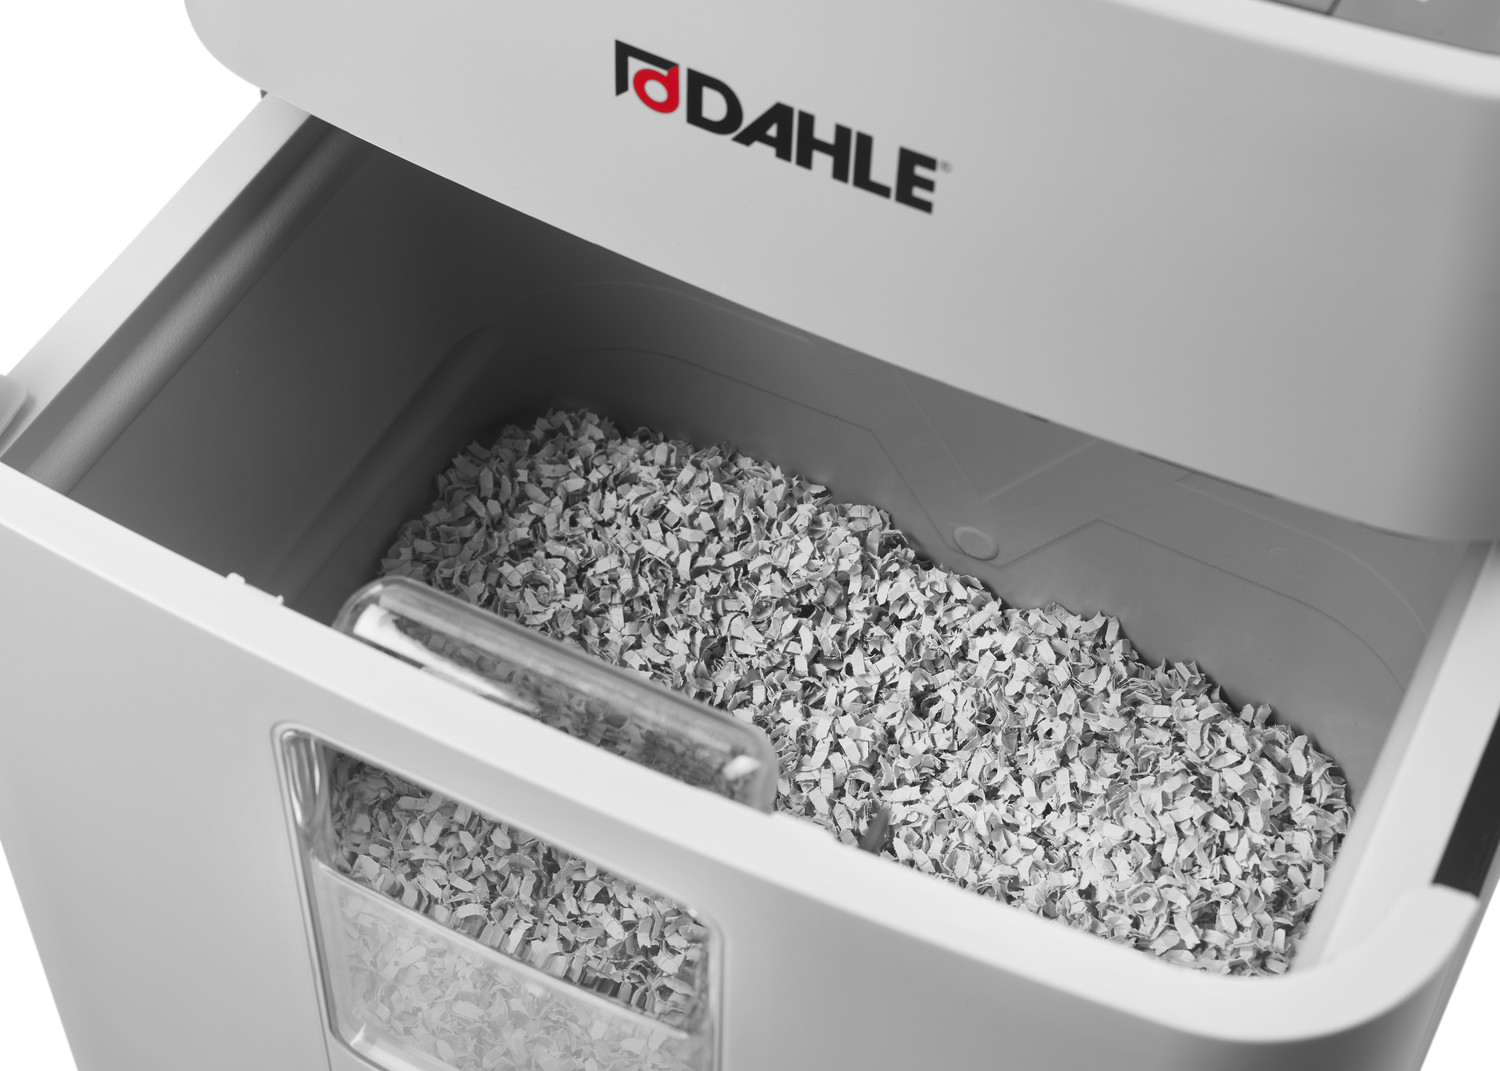 Pull-out waste box for conveniently emptying the document shredder